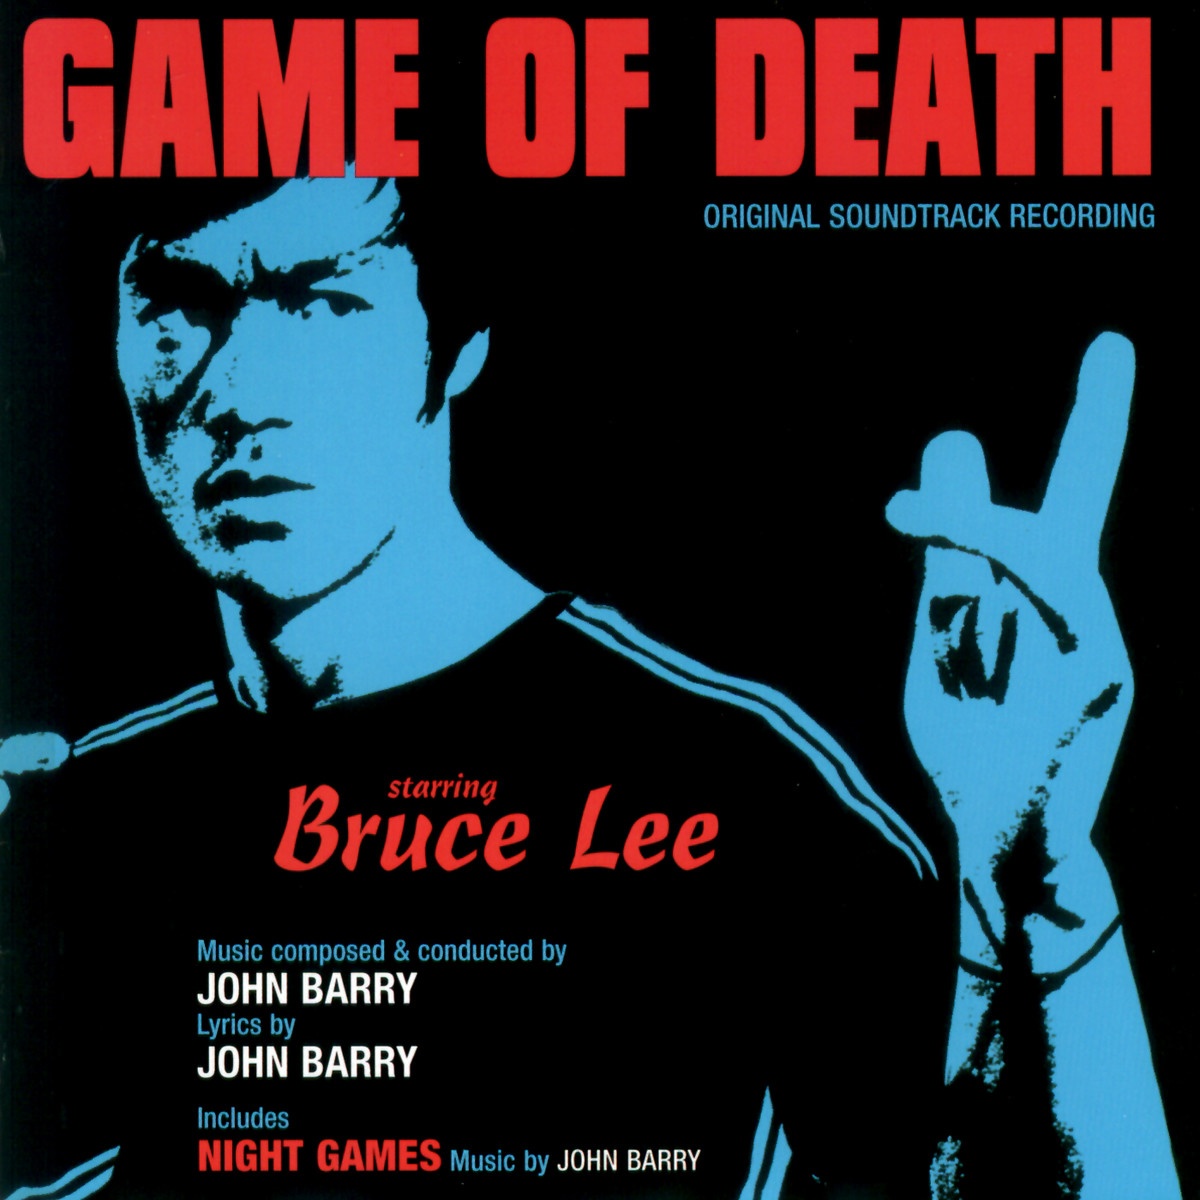 Main Title / Set Fight With Chuck Norris (From "Game Of Death")